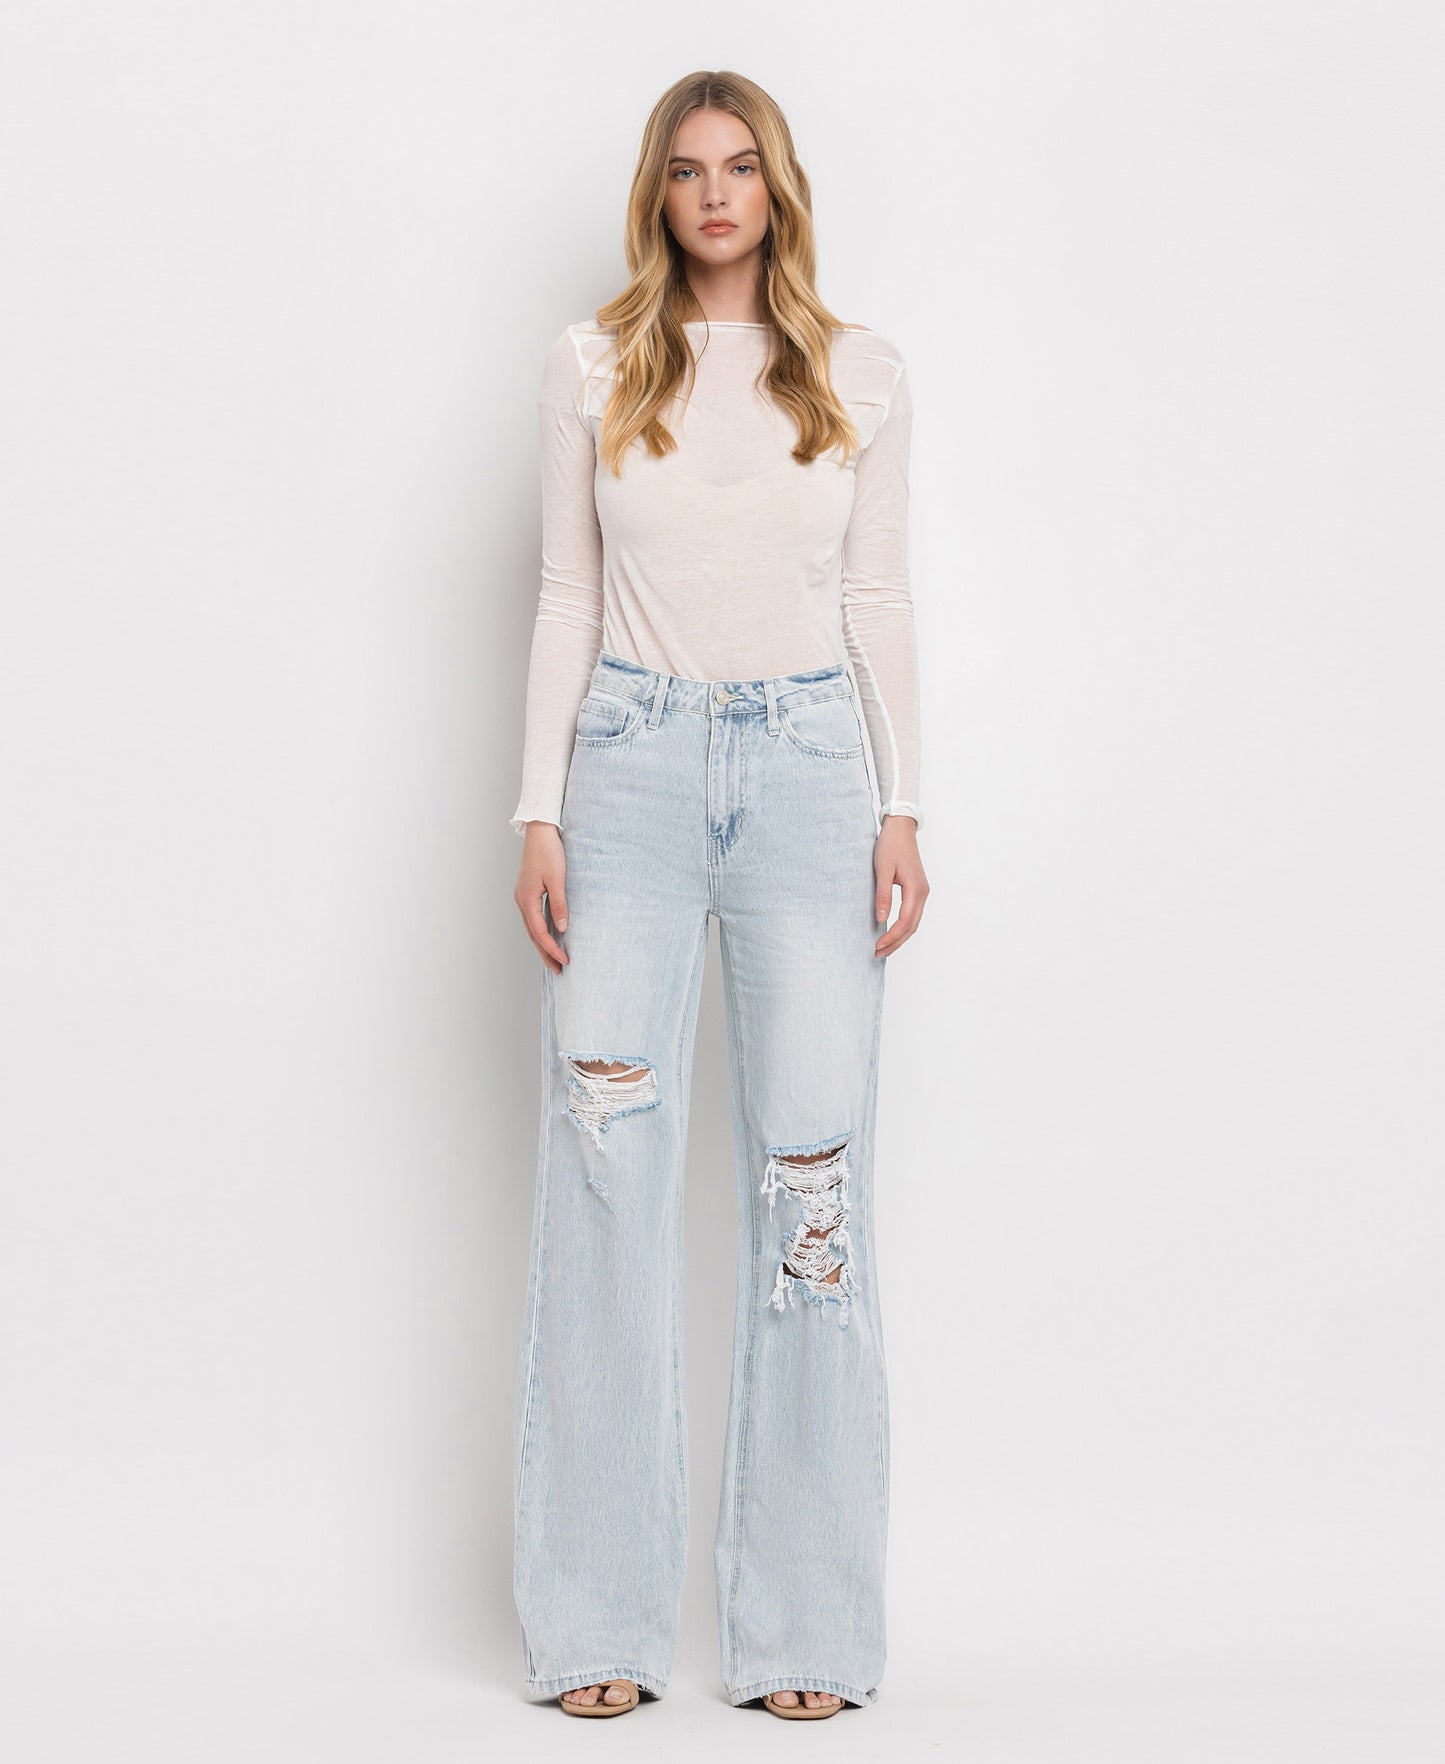 Front product images of Avenida - Super High Rise 90's Vintage Flare Jeans